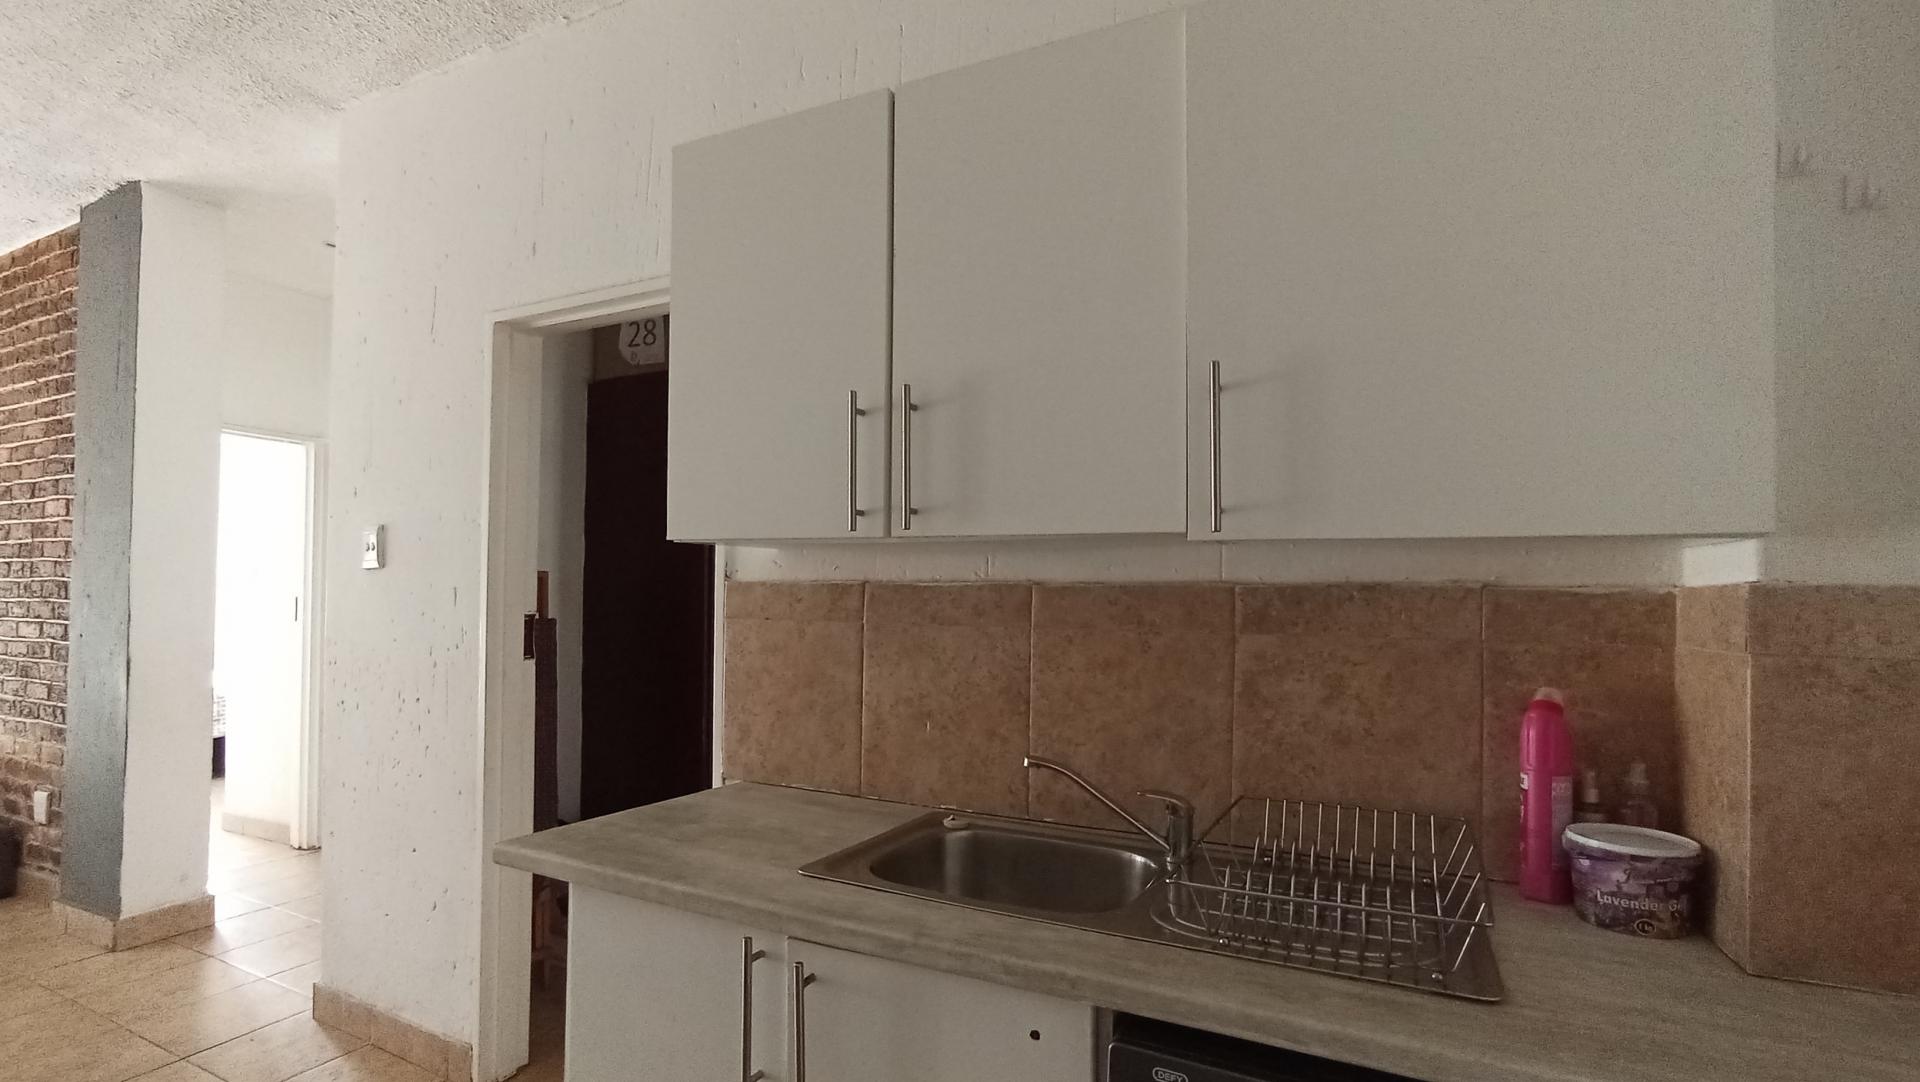 Kitchen - 9 square meters of property in Buccleuch